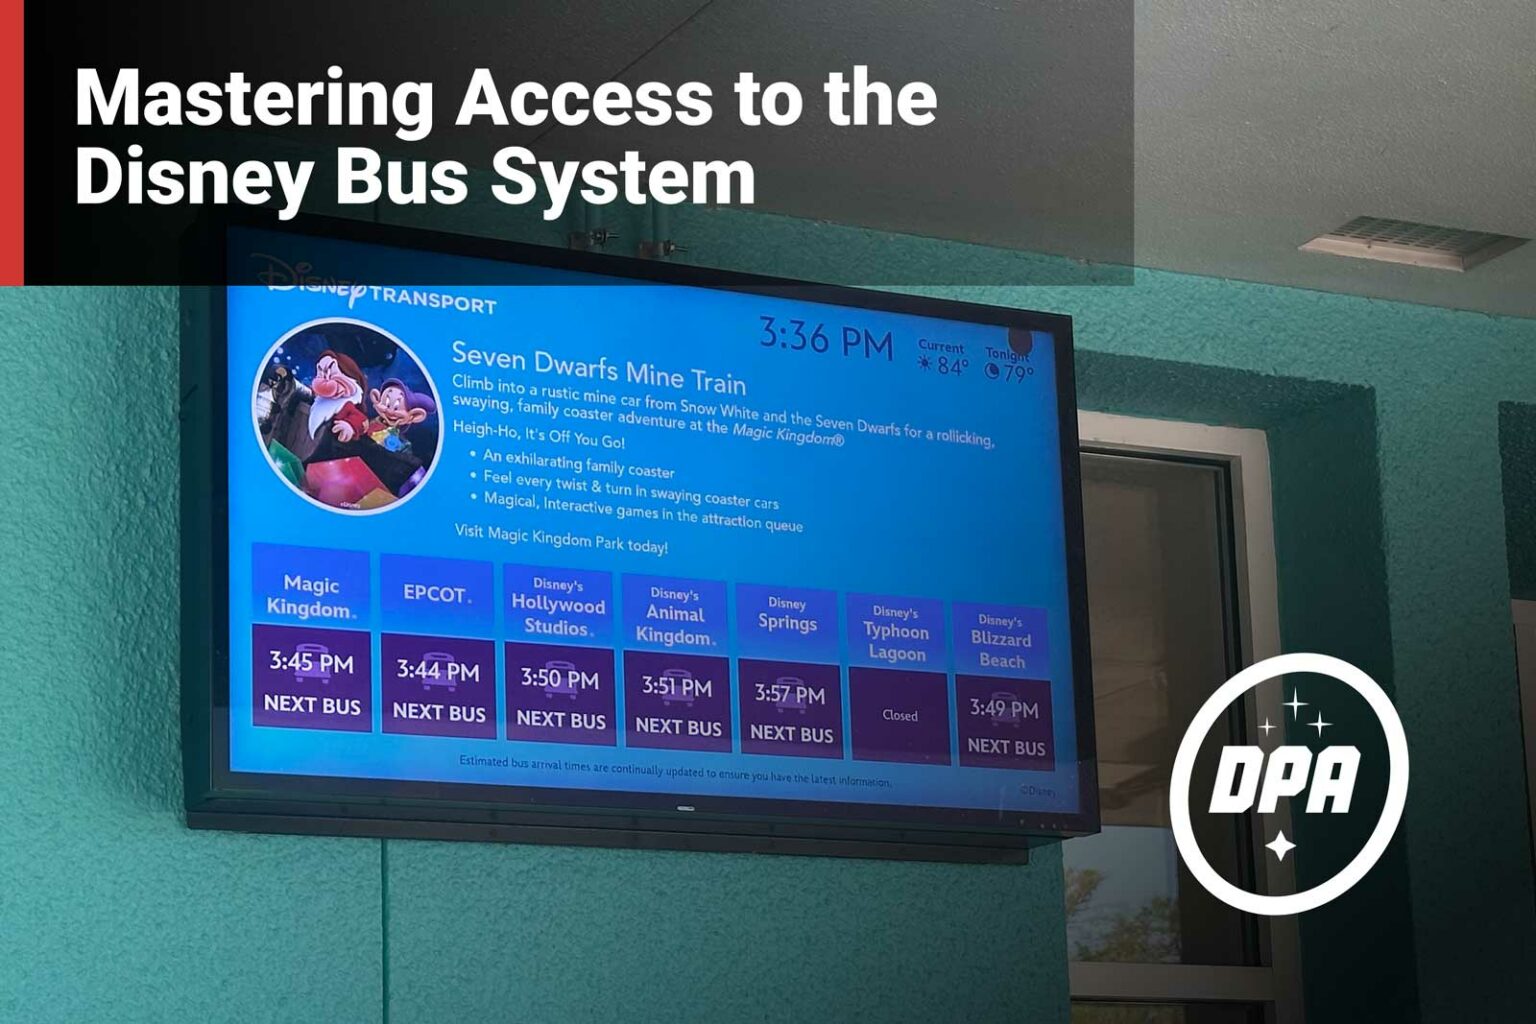 Mastering Access to the Disney Bus System